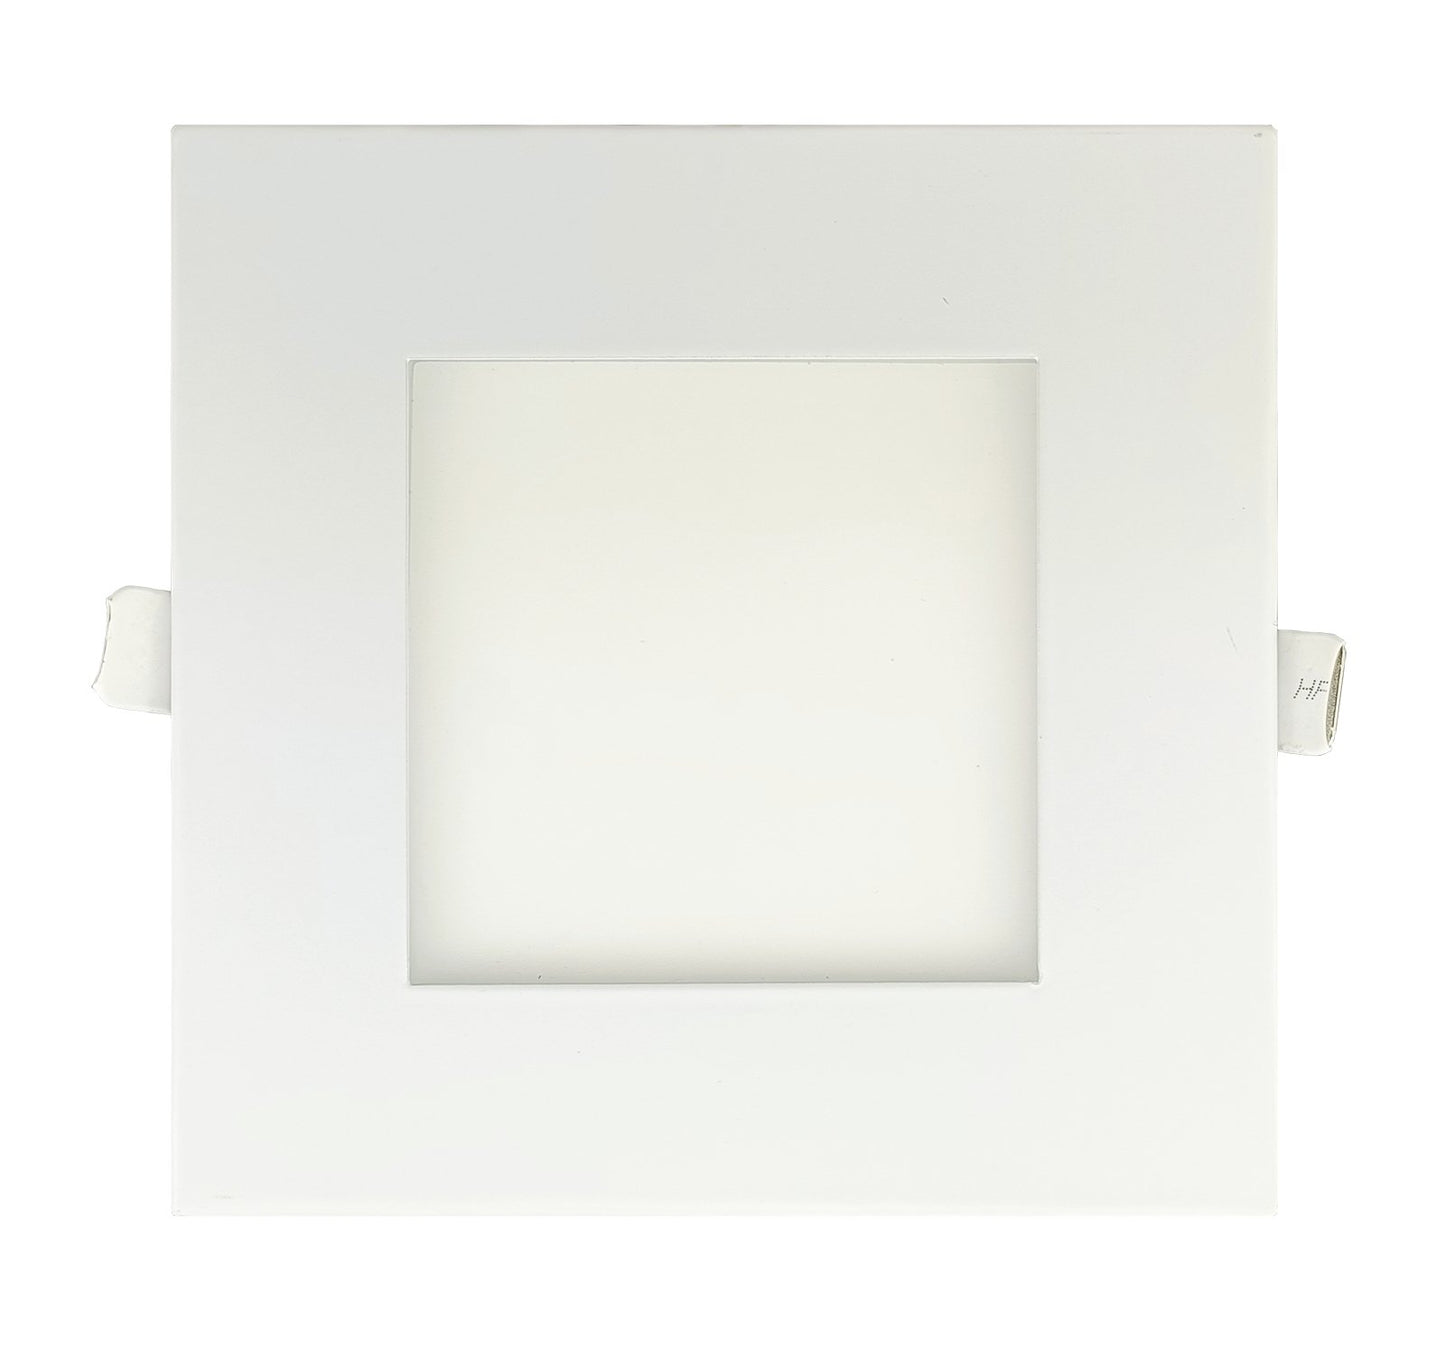 GDL-G97023Goodlite G-97023 5" 15W LED Square Recessed Slim Spotlight Selectable CCT Fire Rated